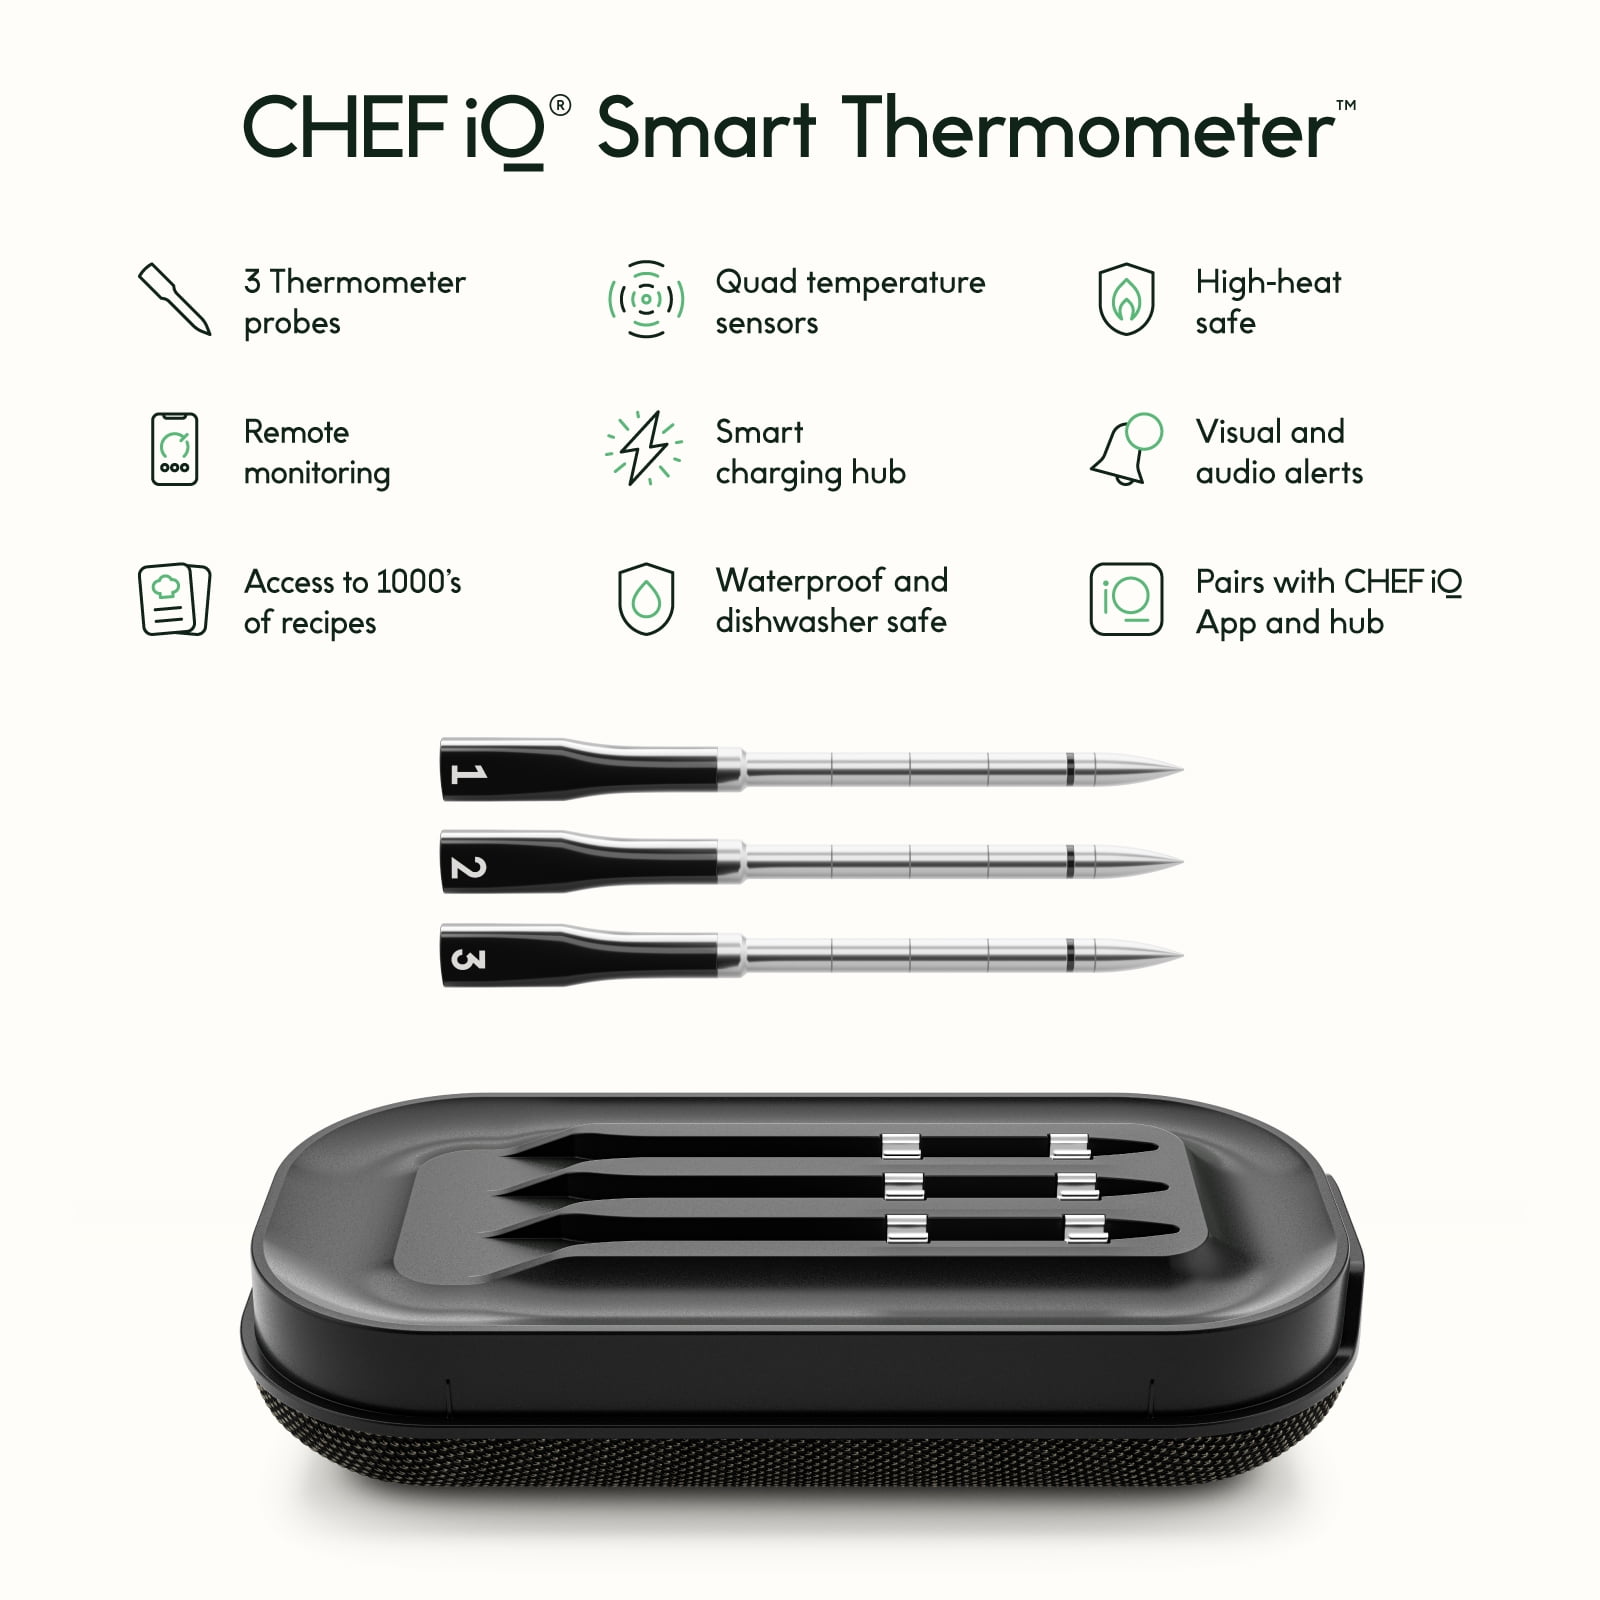 CHEF iQ® Launches Innovative, Wireless Smart Thermometer™ with Hub